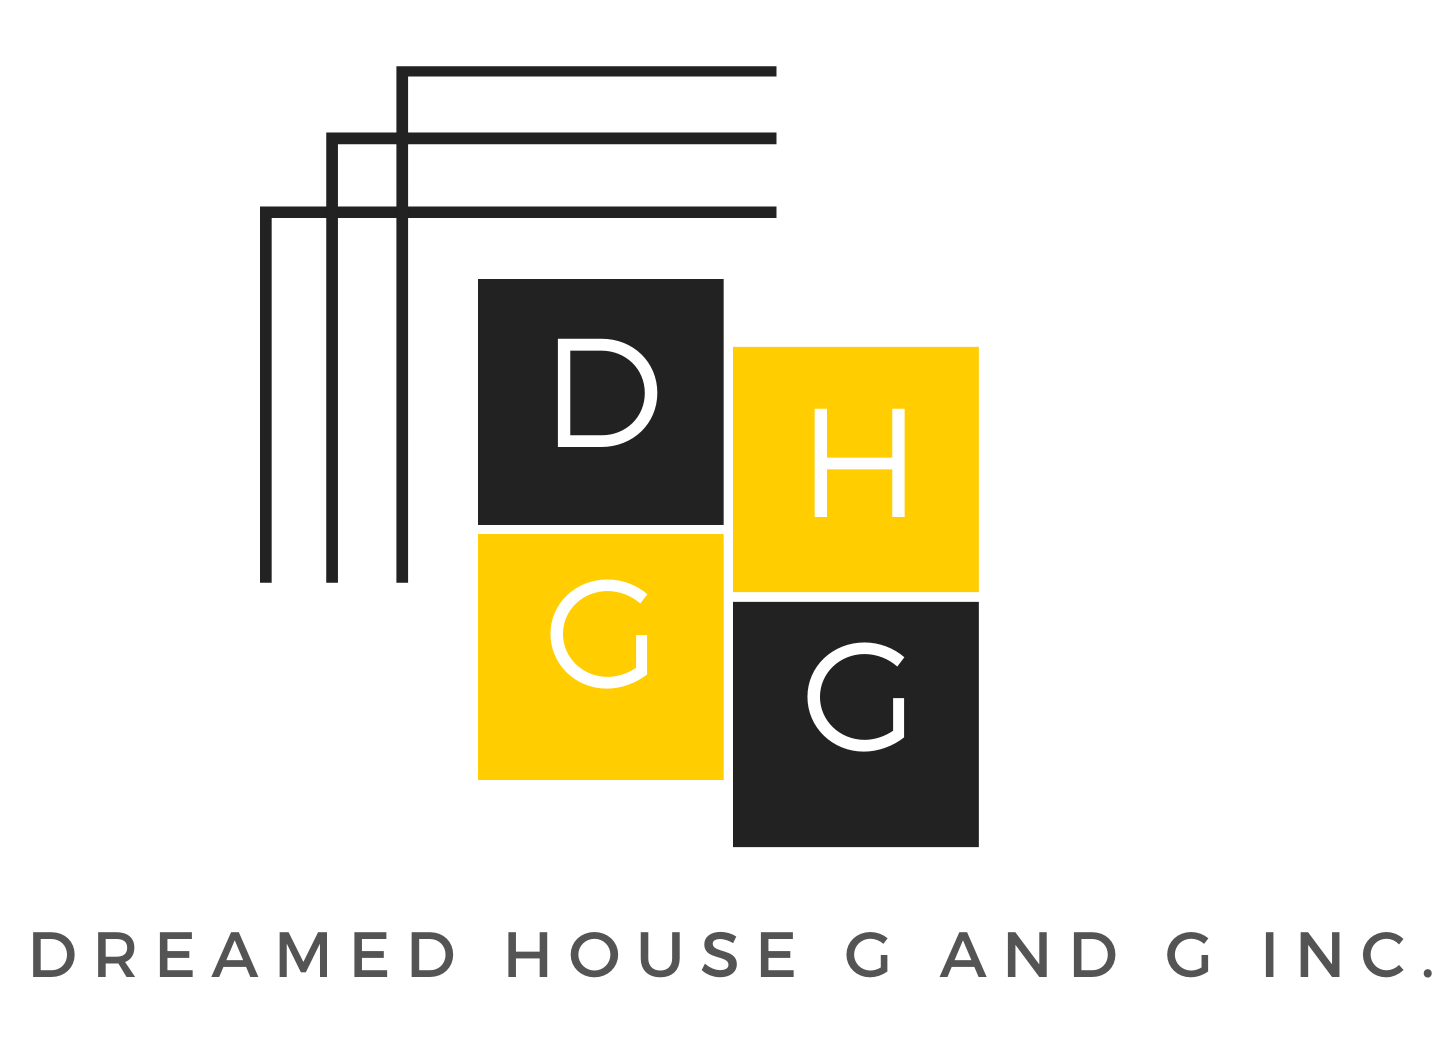 Dreamed House G And G, Inc. Logo